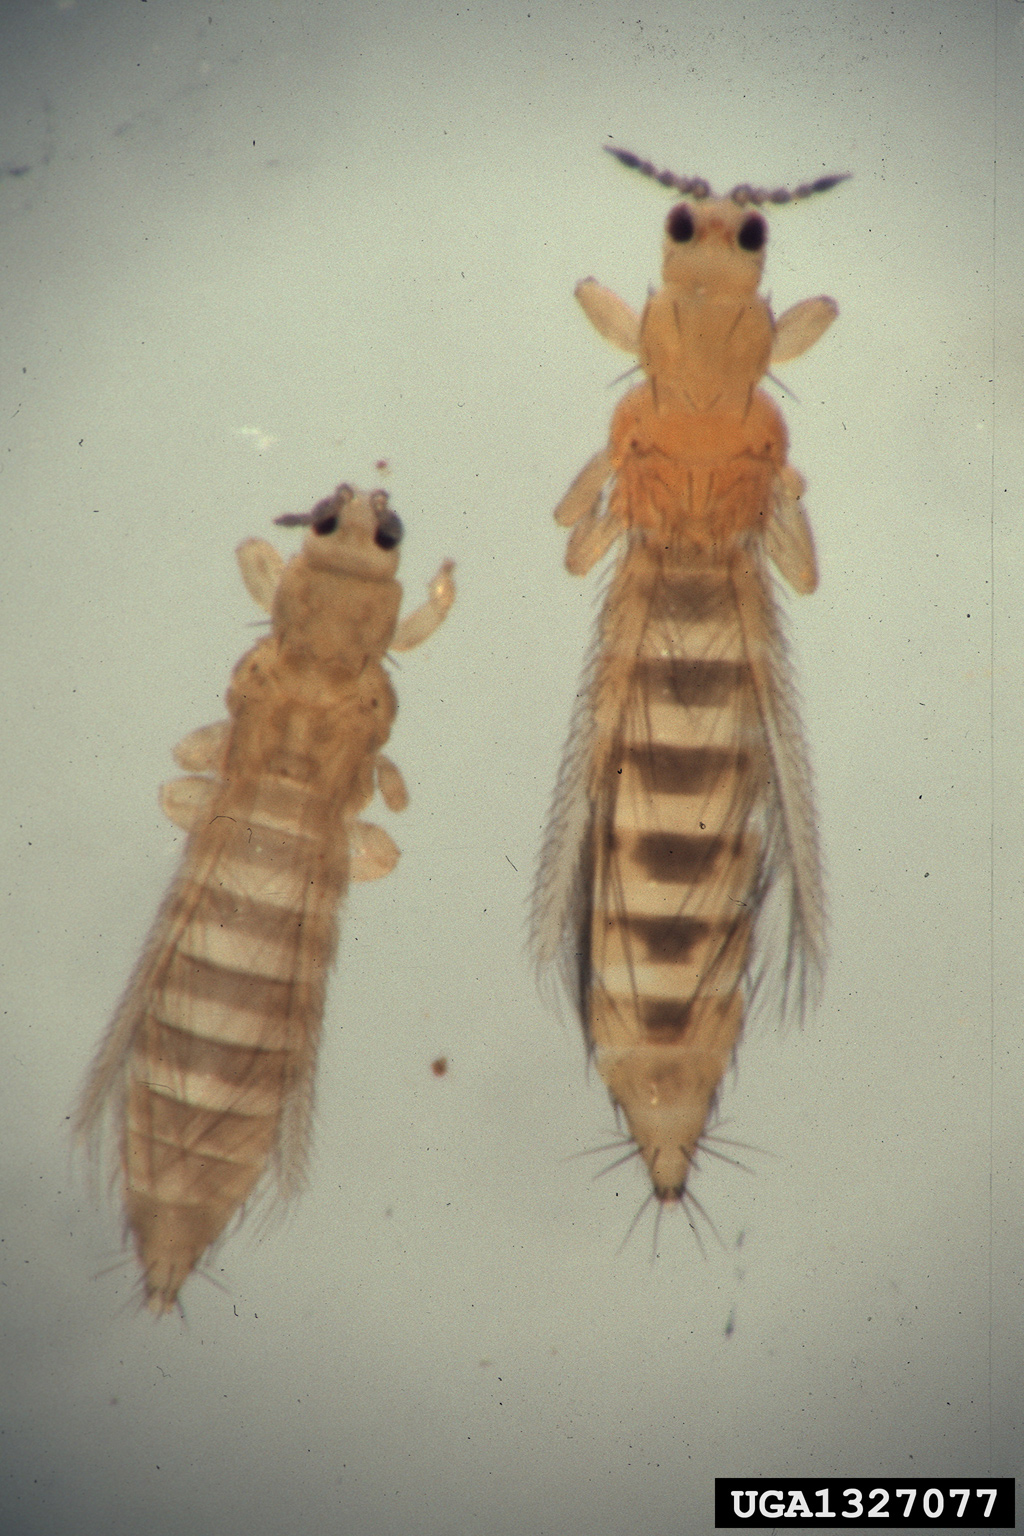 Onion thrips on the left and western flower thrips shown on the right.